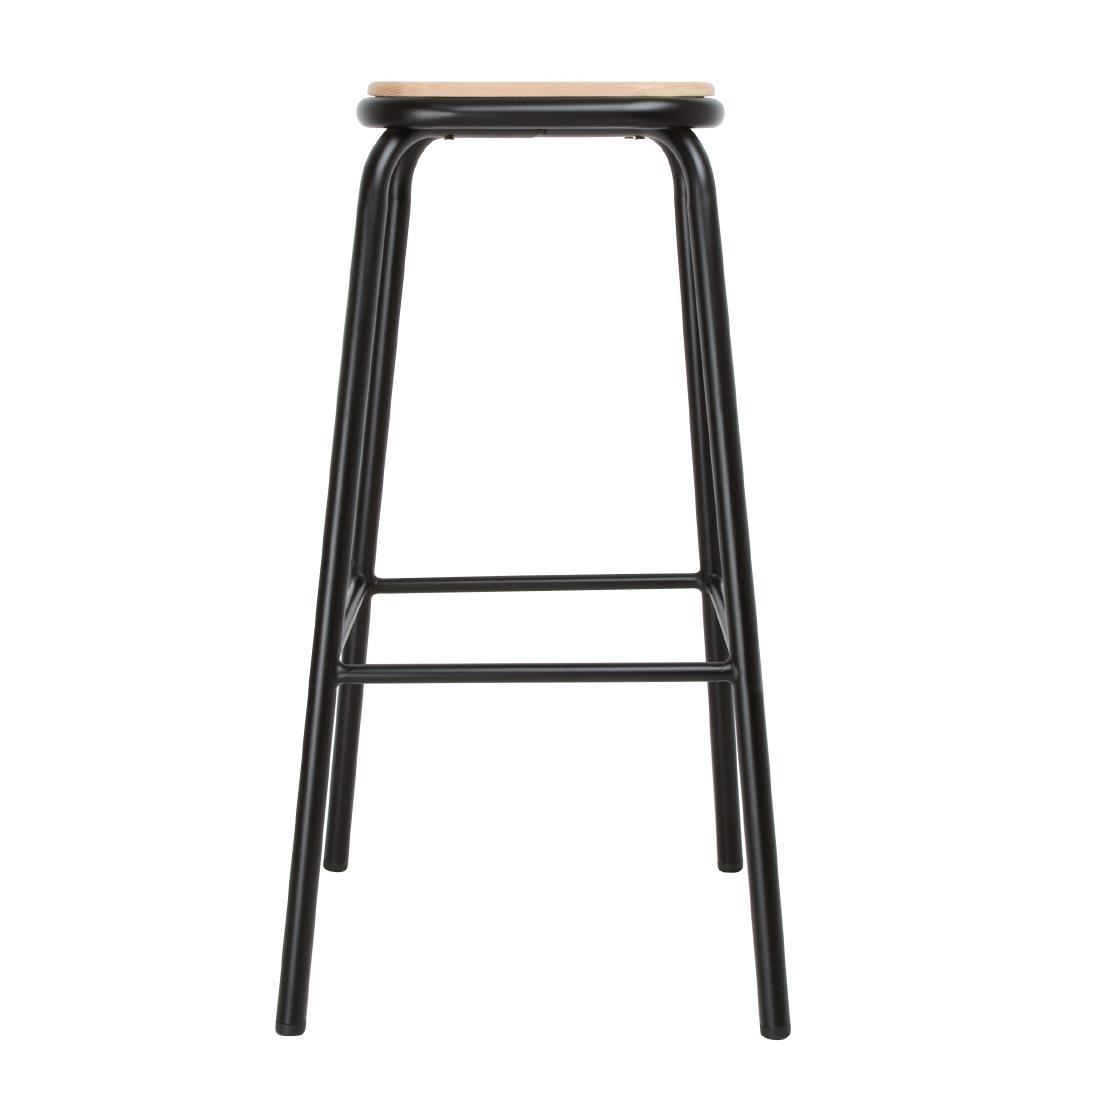 Bolero Cantina High Stools with Wooden Seat Pad Black (Pack of 4) - DE482  - 2